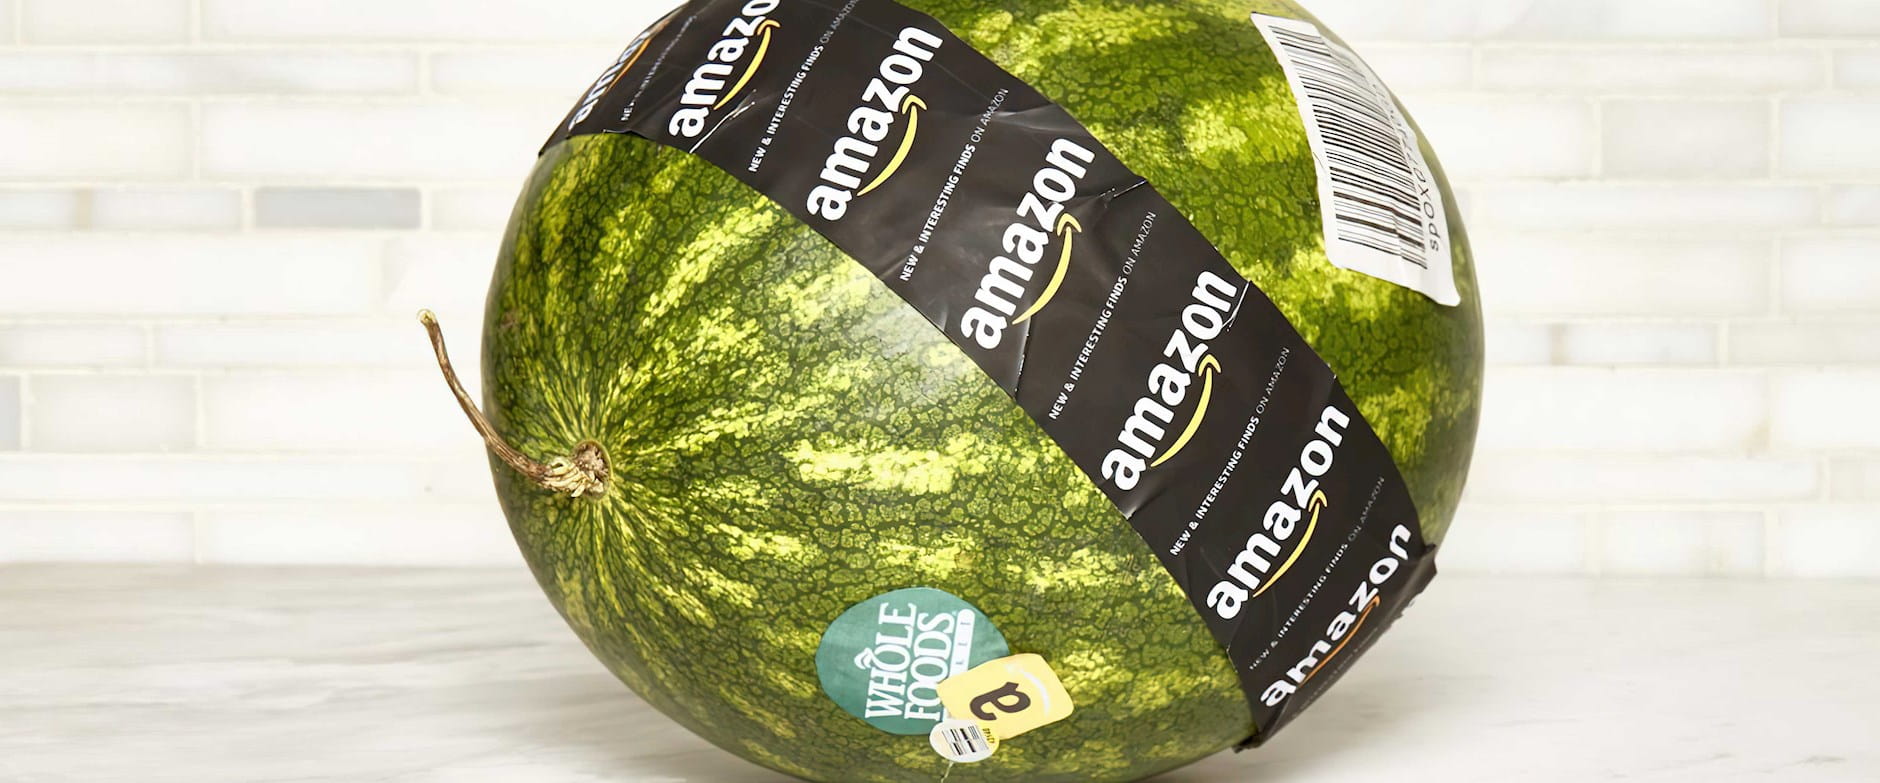 Watermelon with Amazon shipping wrap on it